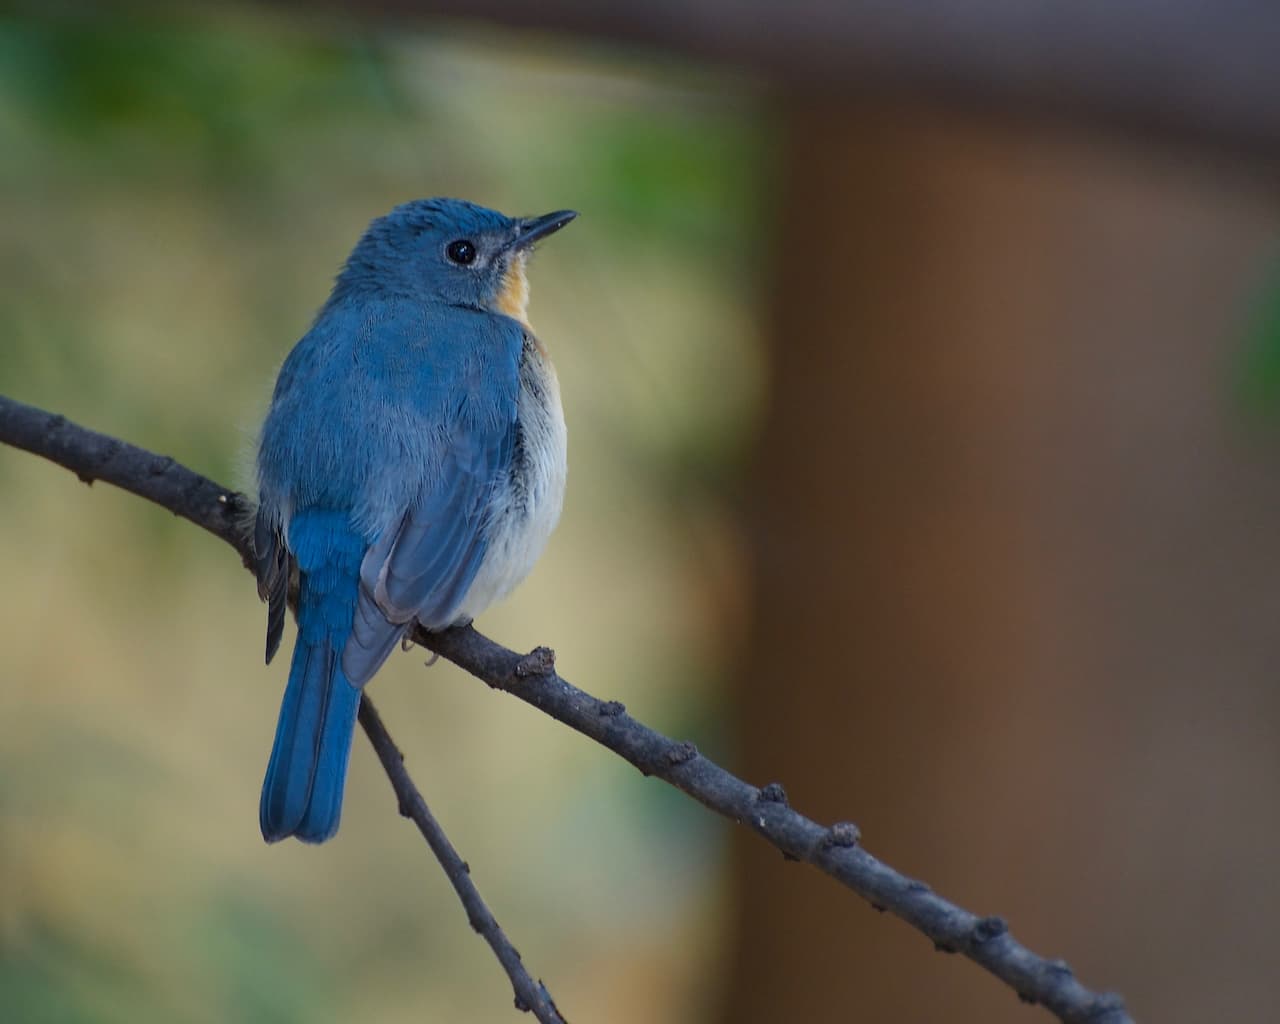 A small Tickells Blue Flycatcher sitting on a branch.